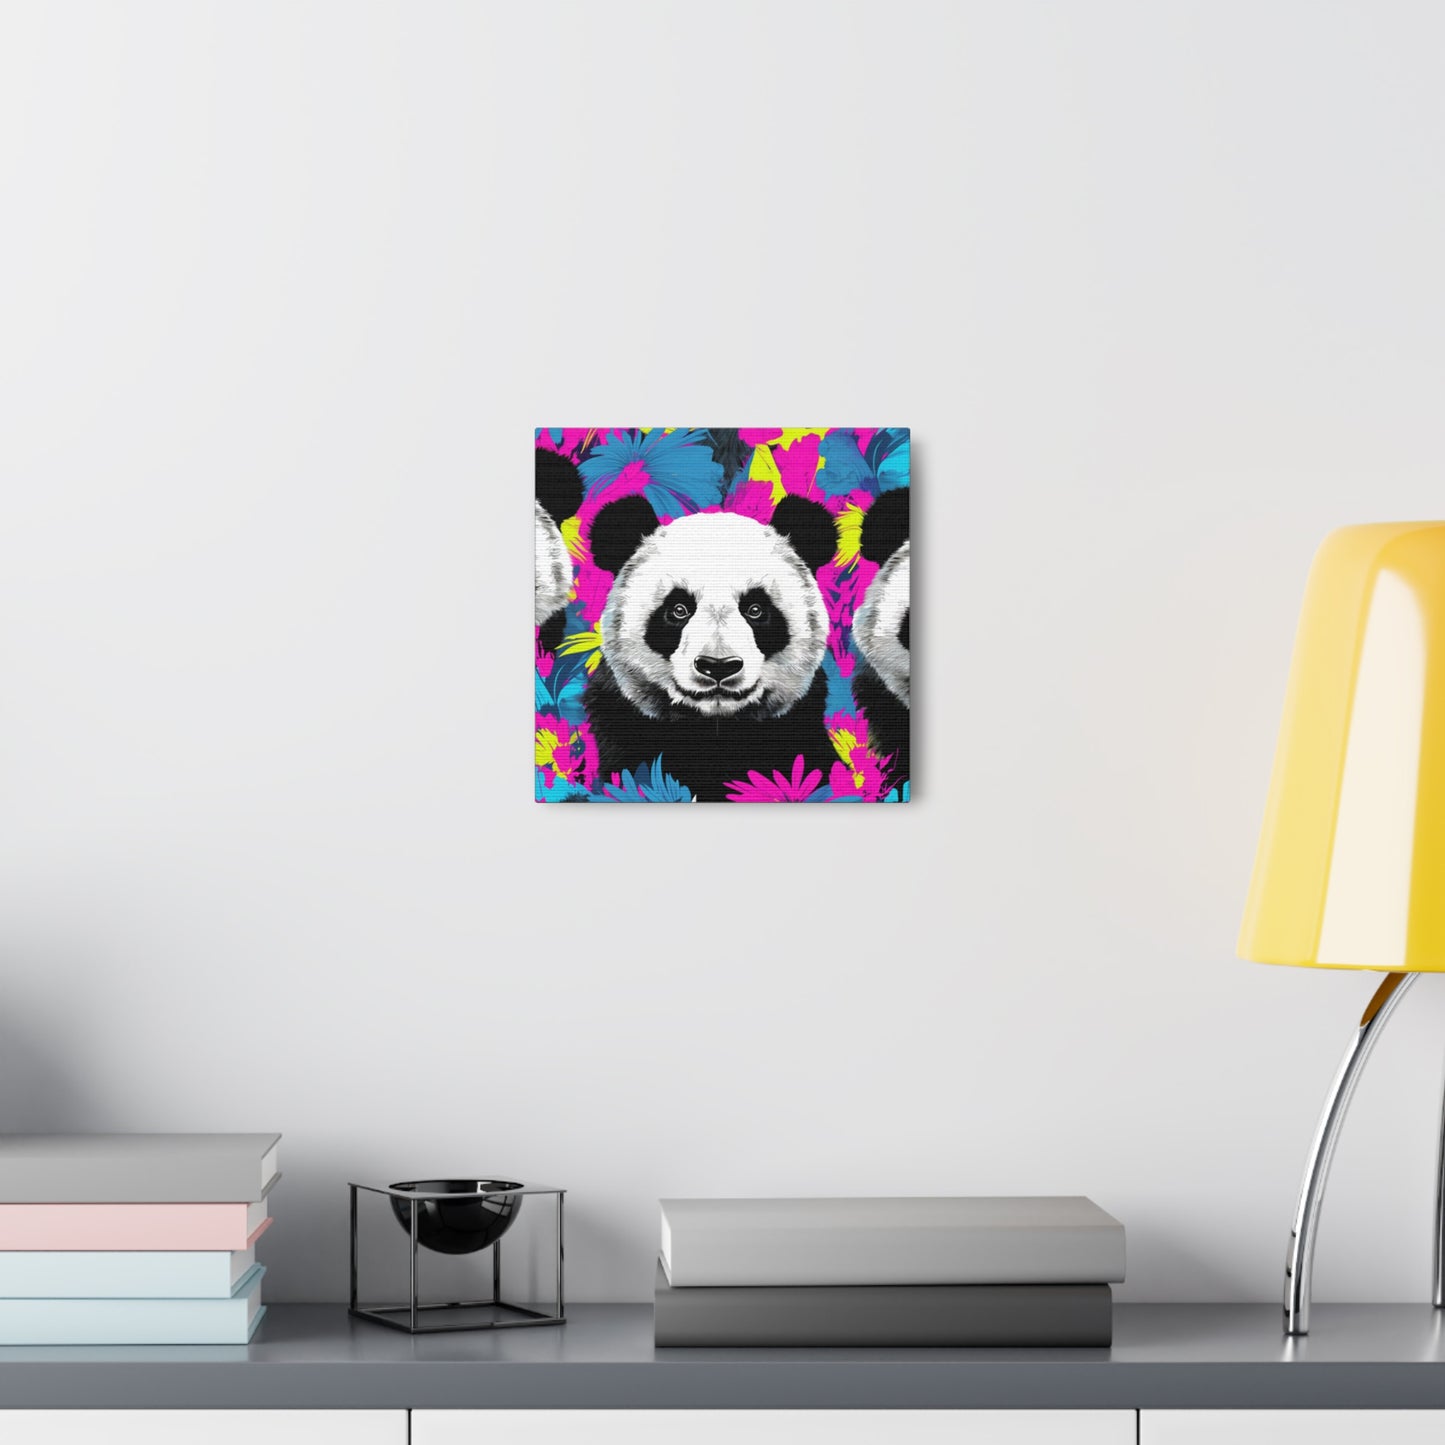 Panda Power: Canvas Gallery Wraps with a Black and White Panda Pattern and Neon Accents